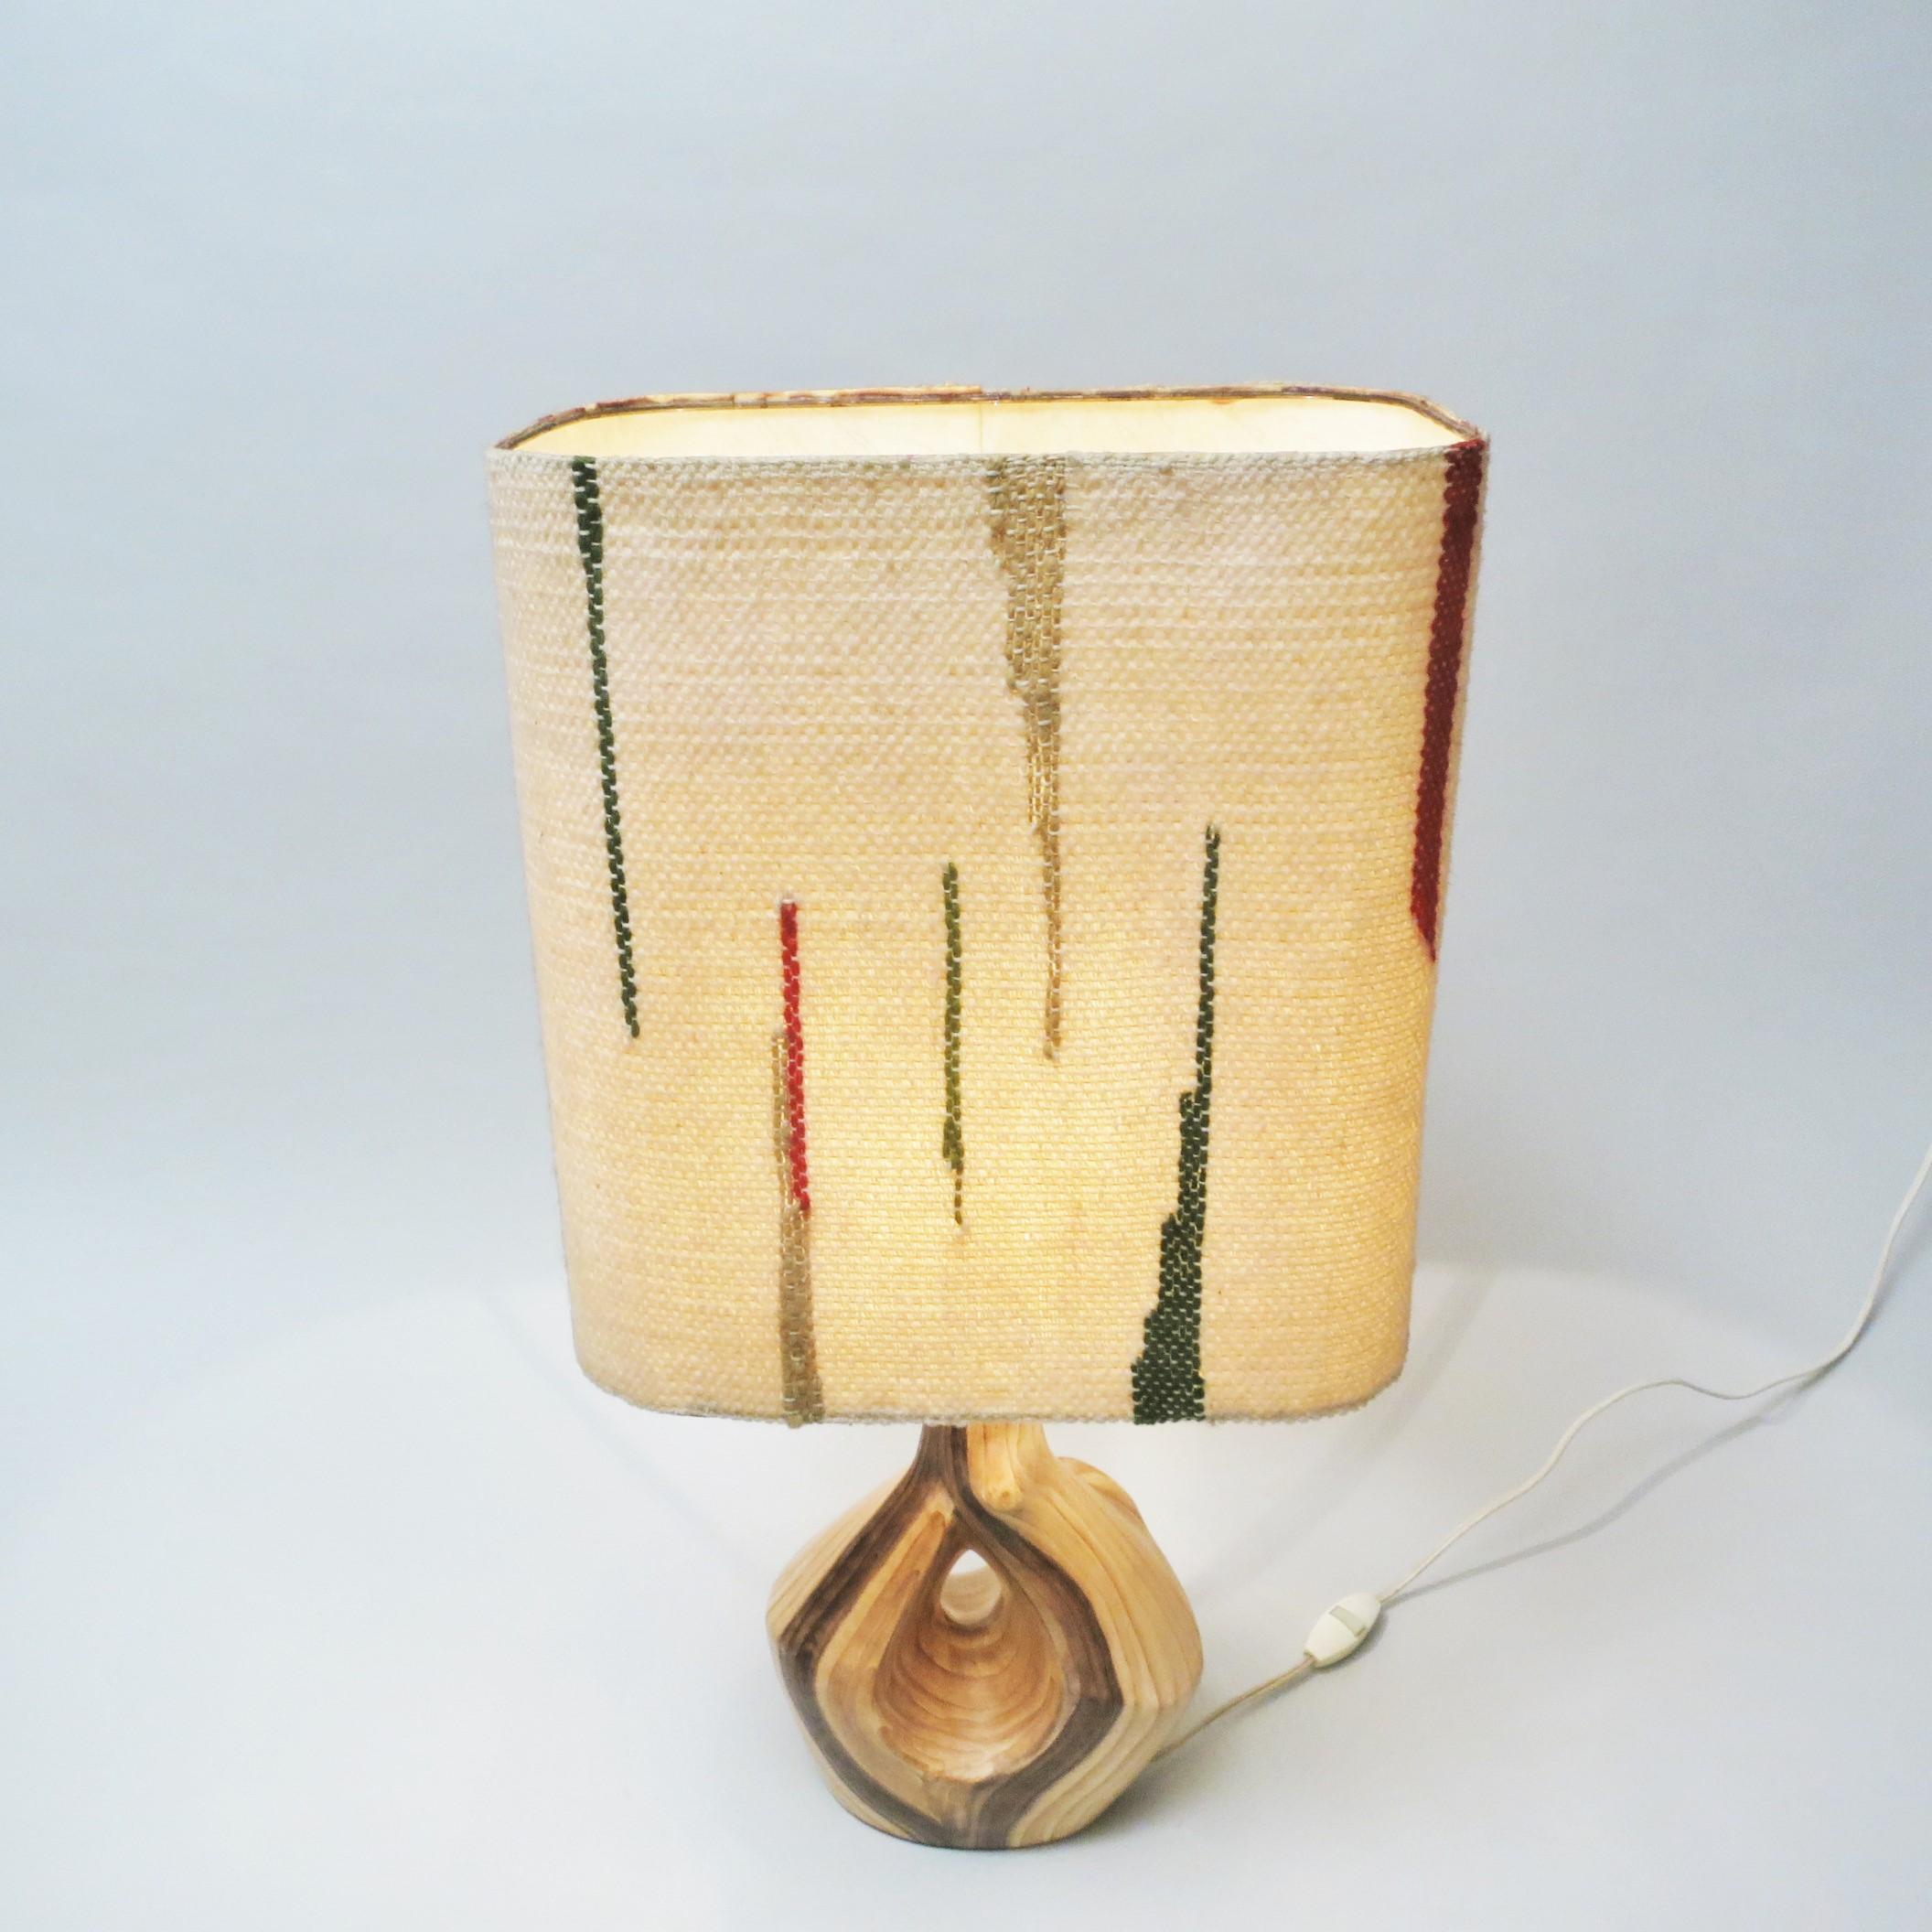 French Mid-Century Modern ceramic Lamp by Grandjean Jourdan. Ceramic with faux wood decor made in the 1950s in Vallauris on the French Riviera. Original shade in handcrafted tapestry with abstract pattern.